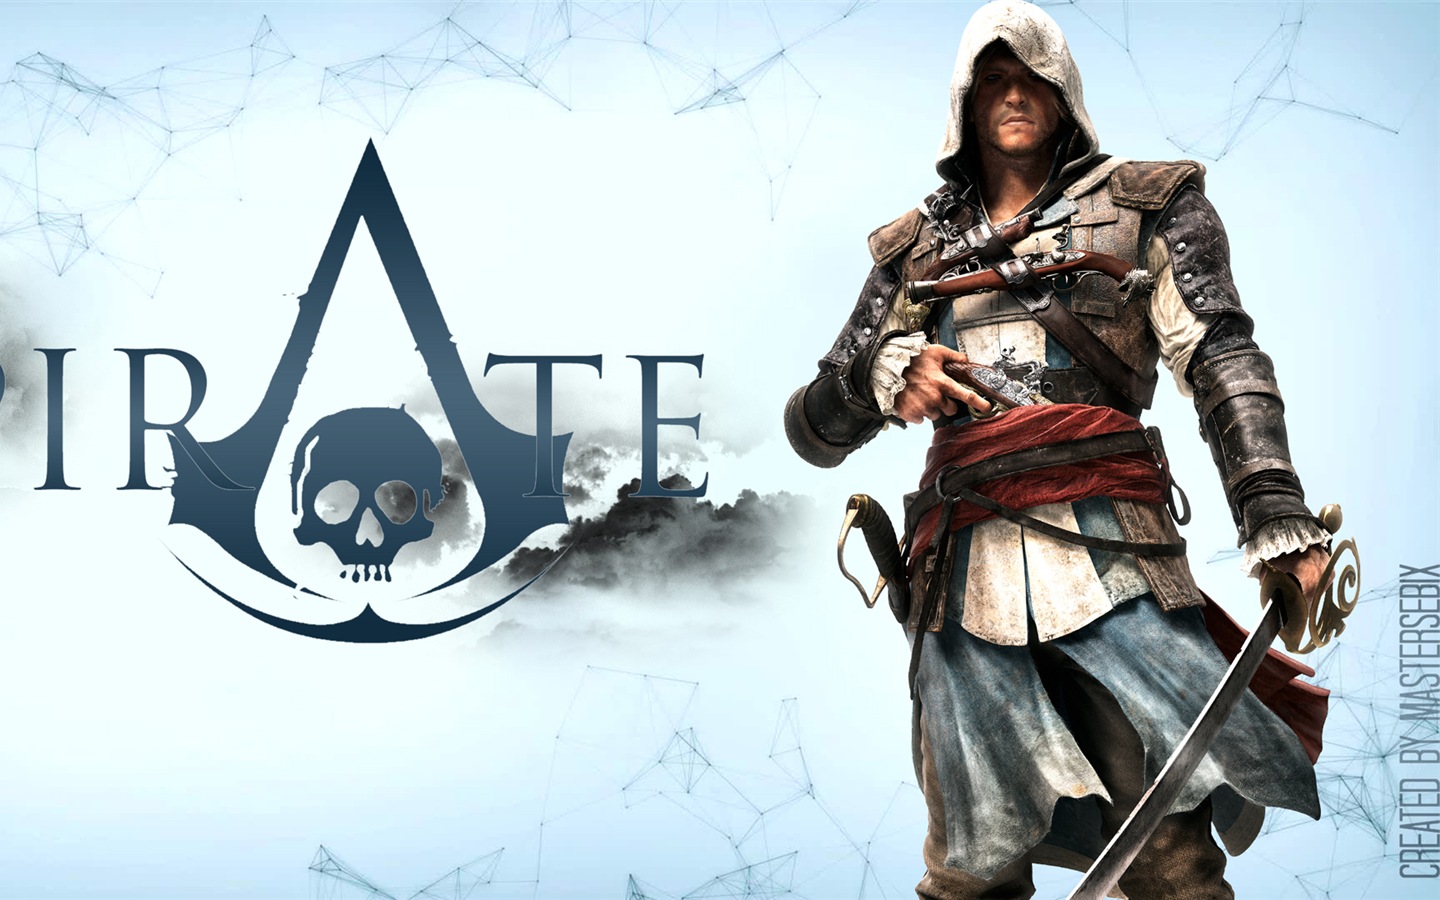 Creed IV Assassin: Black Flag HD wallpapers #18 - 1440x900